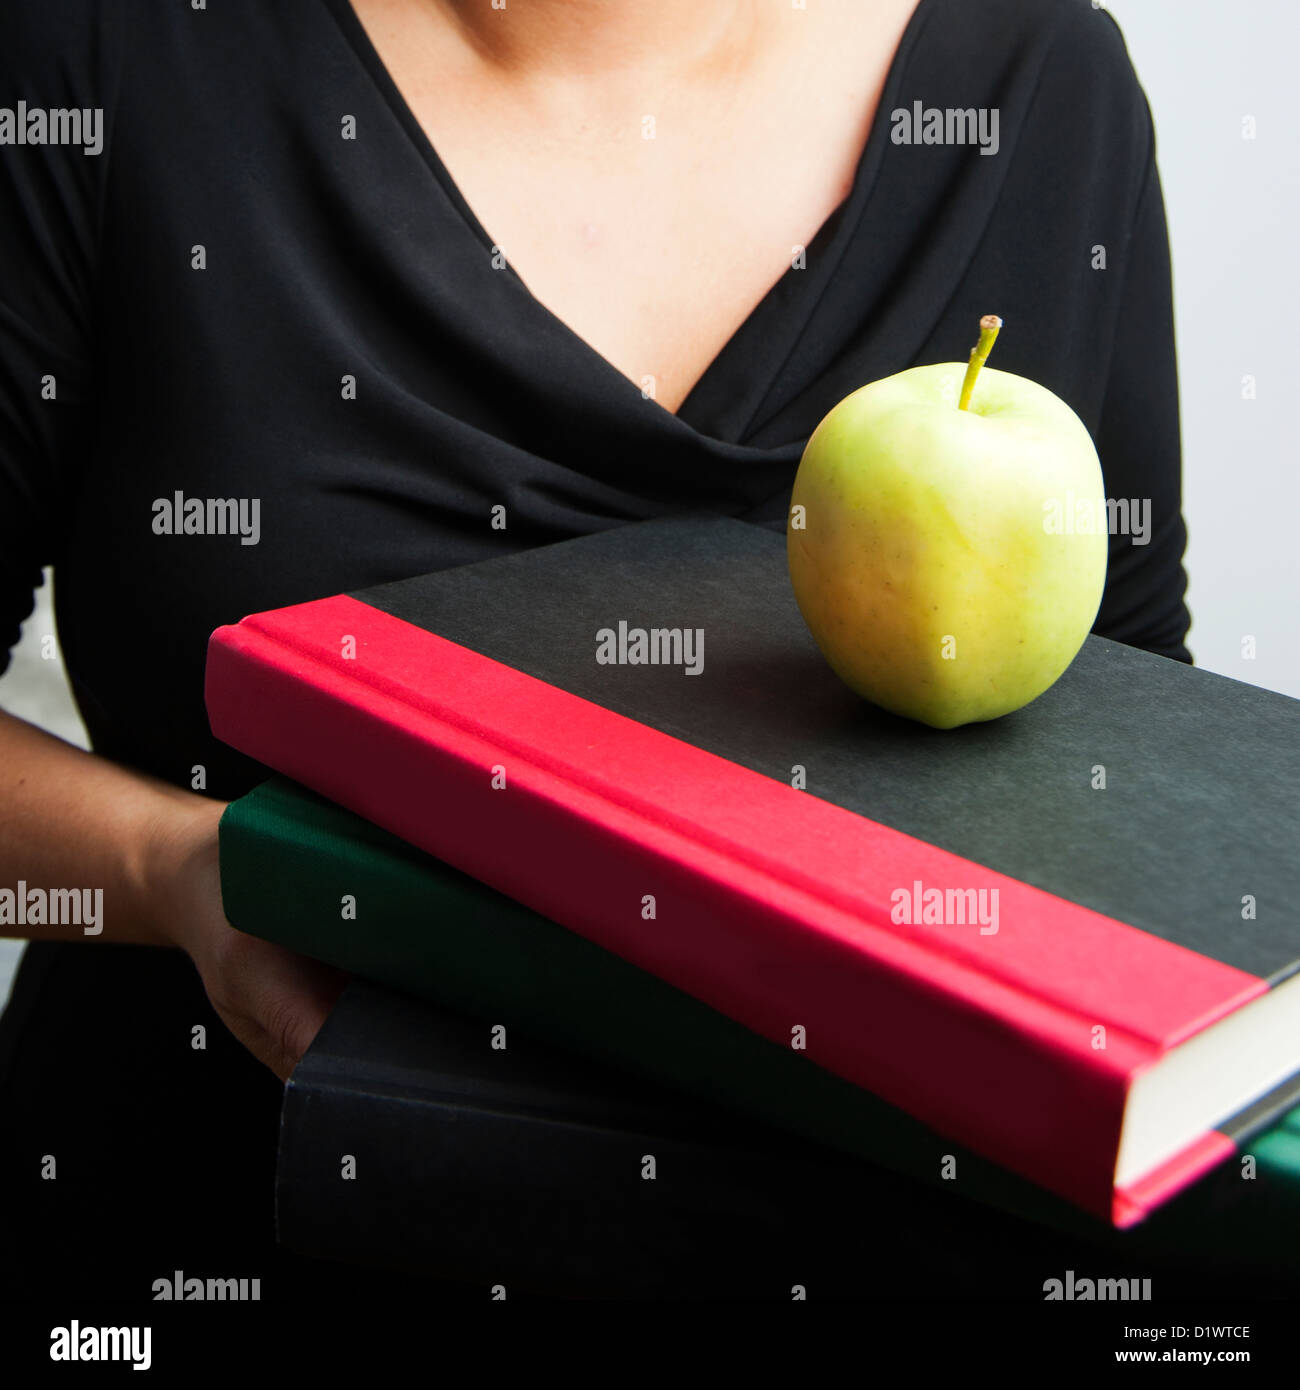 Woman holding text books with apple on top, arms and chest area shown only Stock Photo